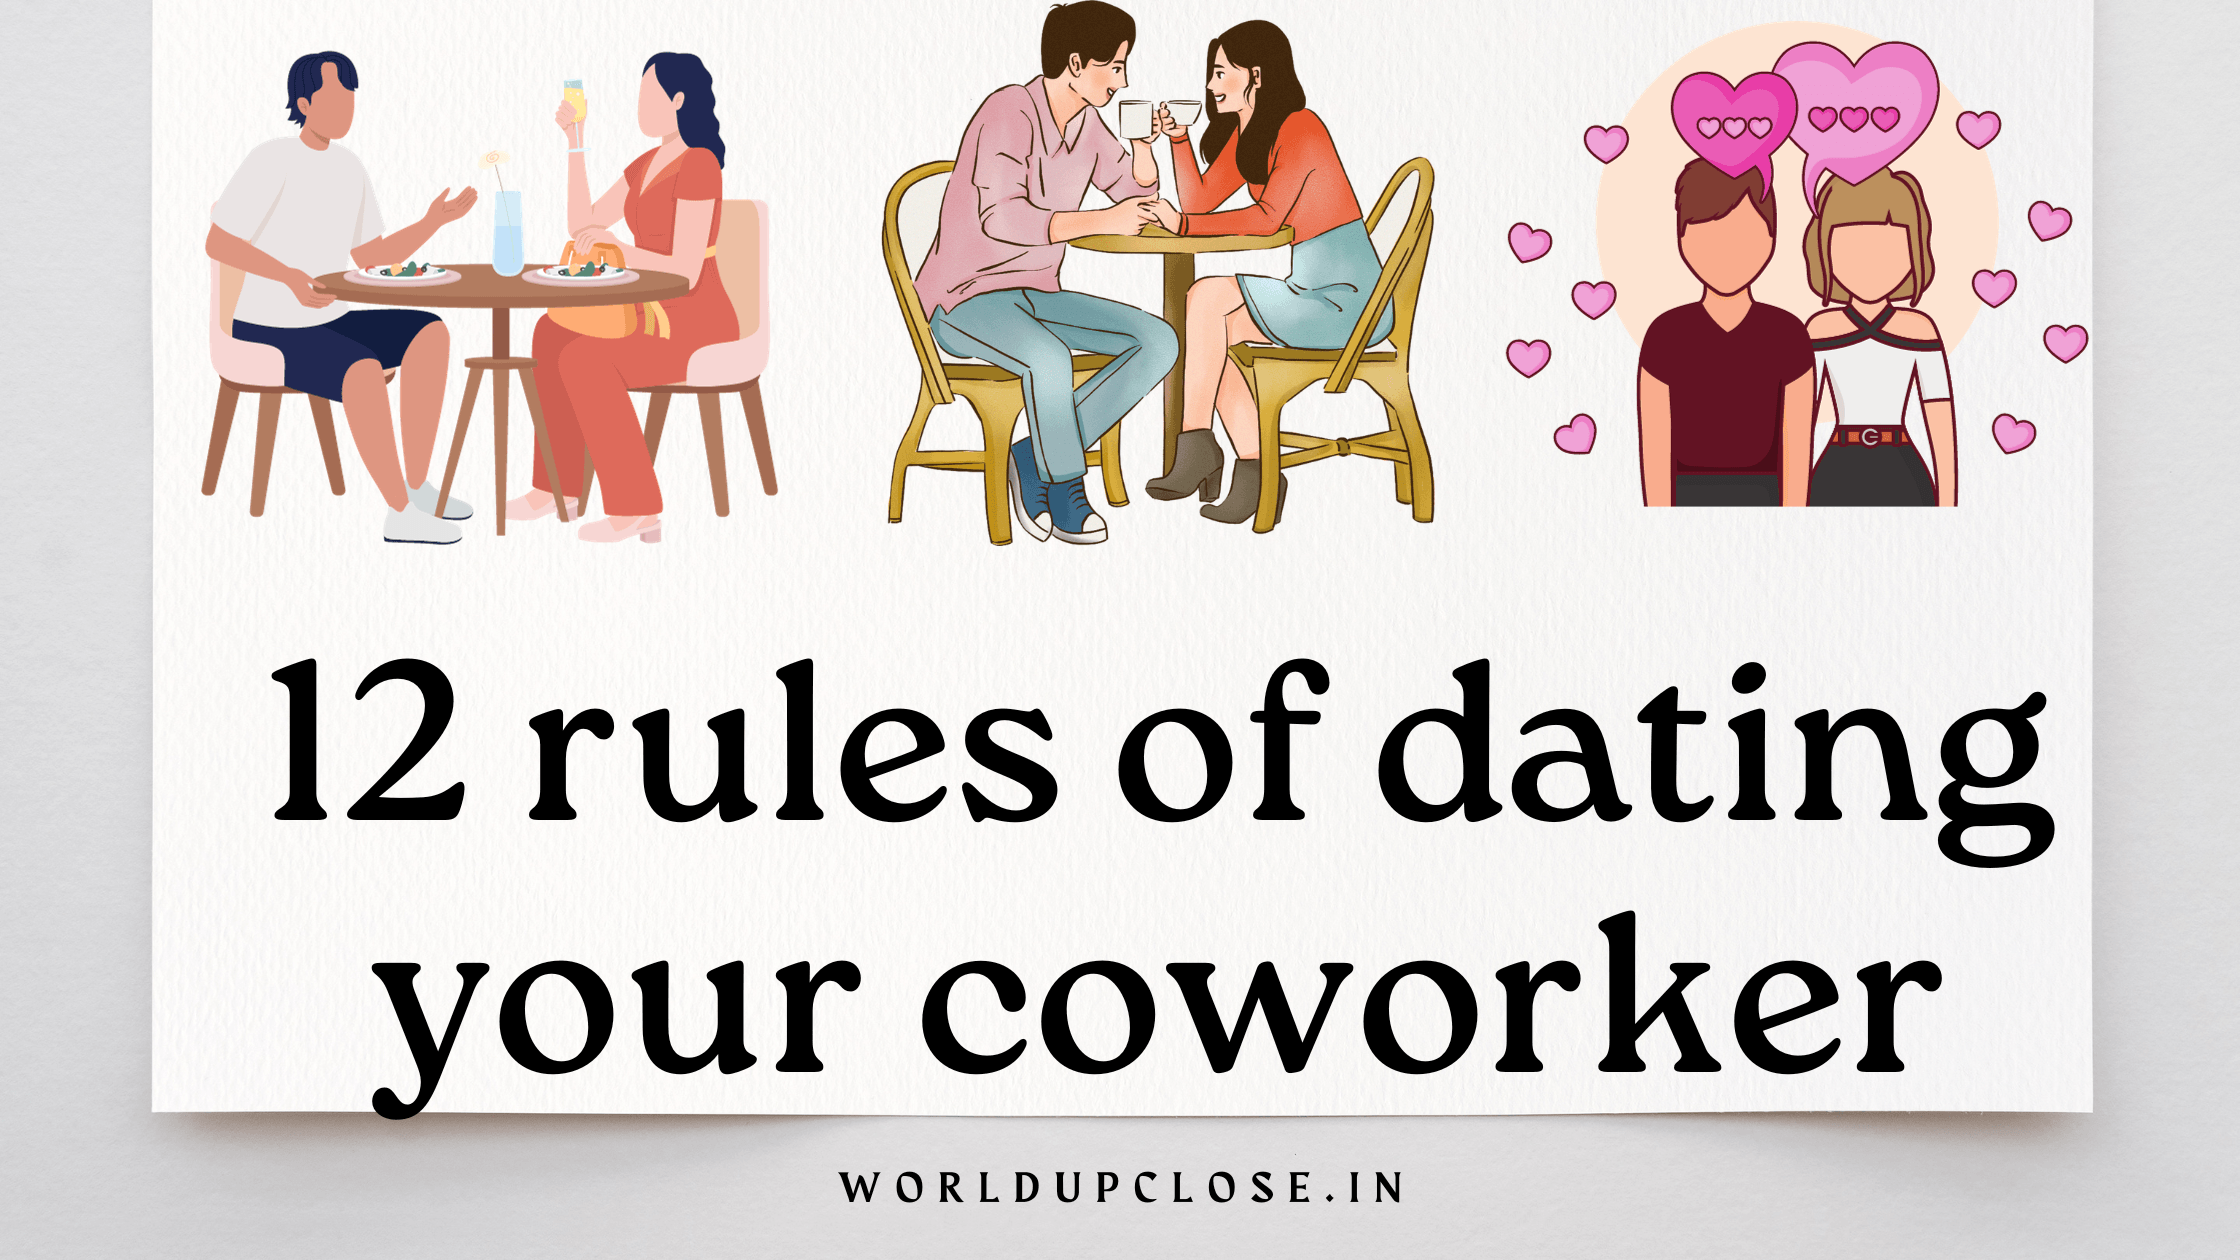 12 Rules of Dating Your Coworker 2